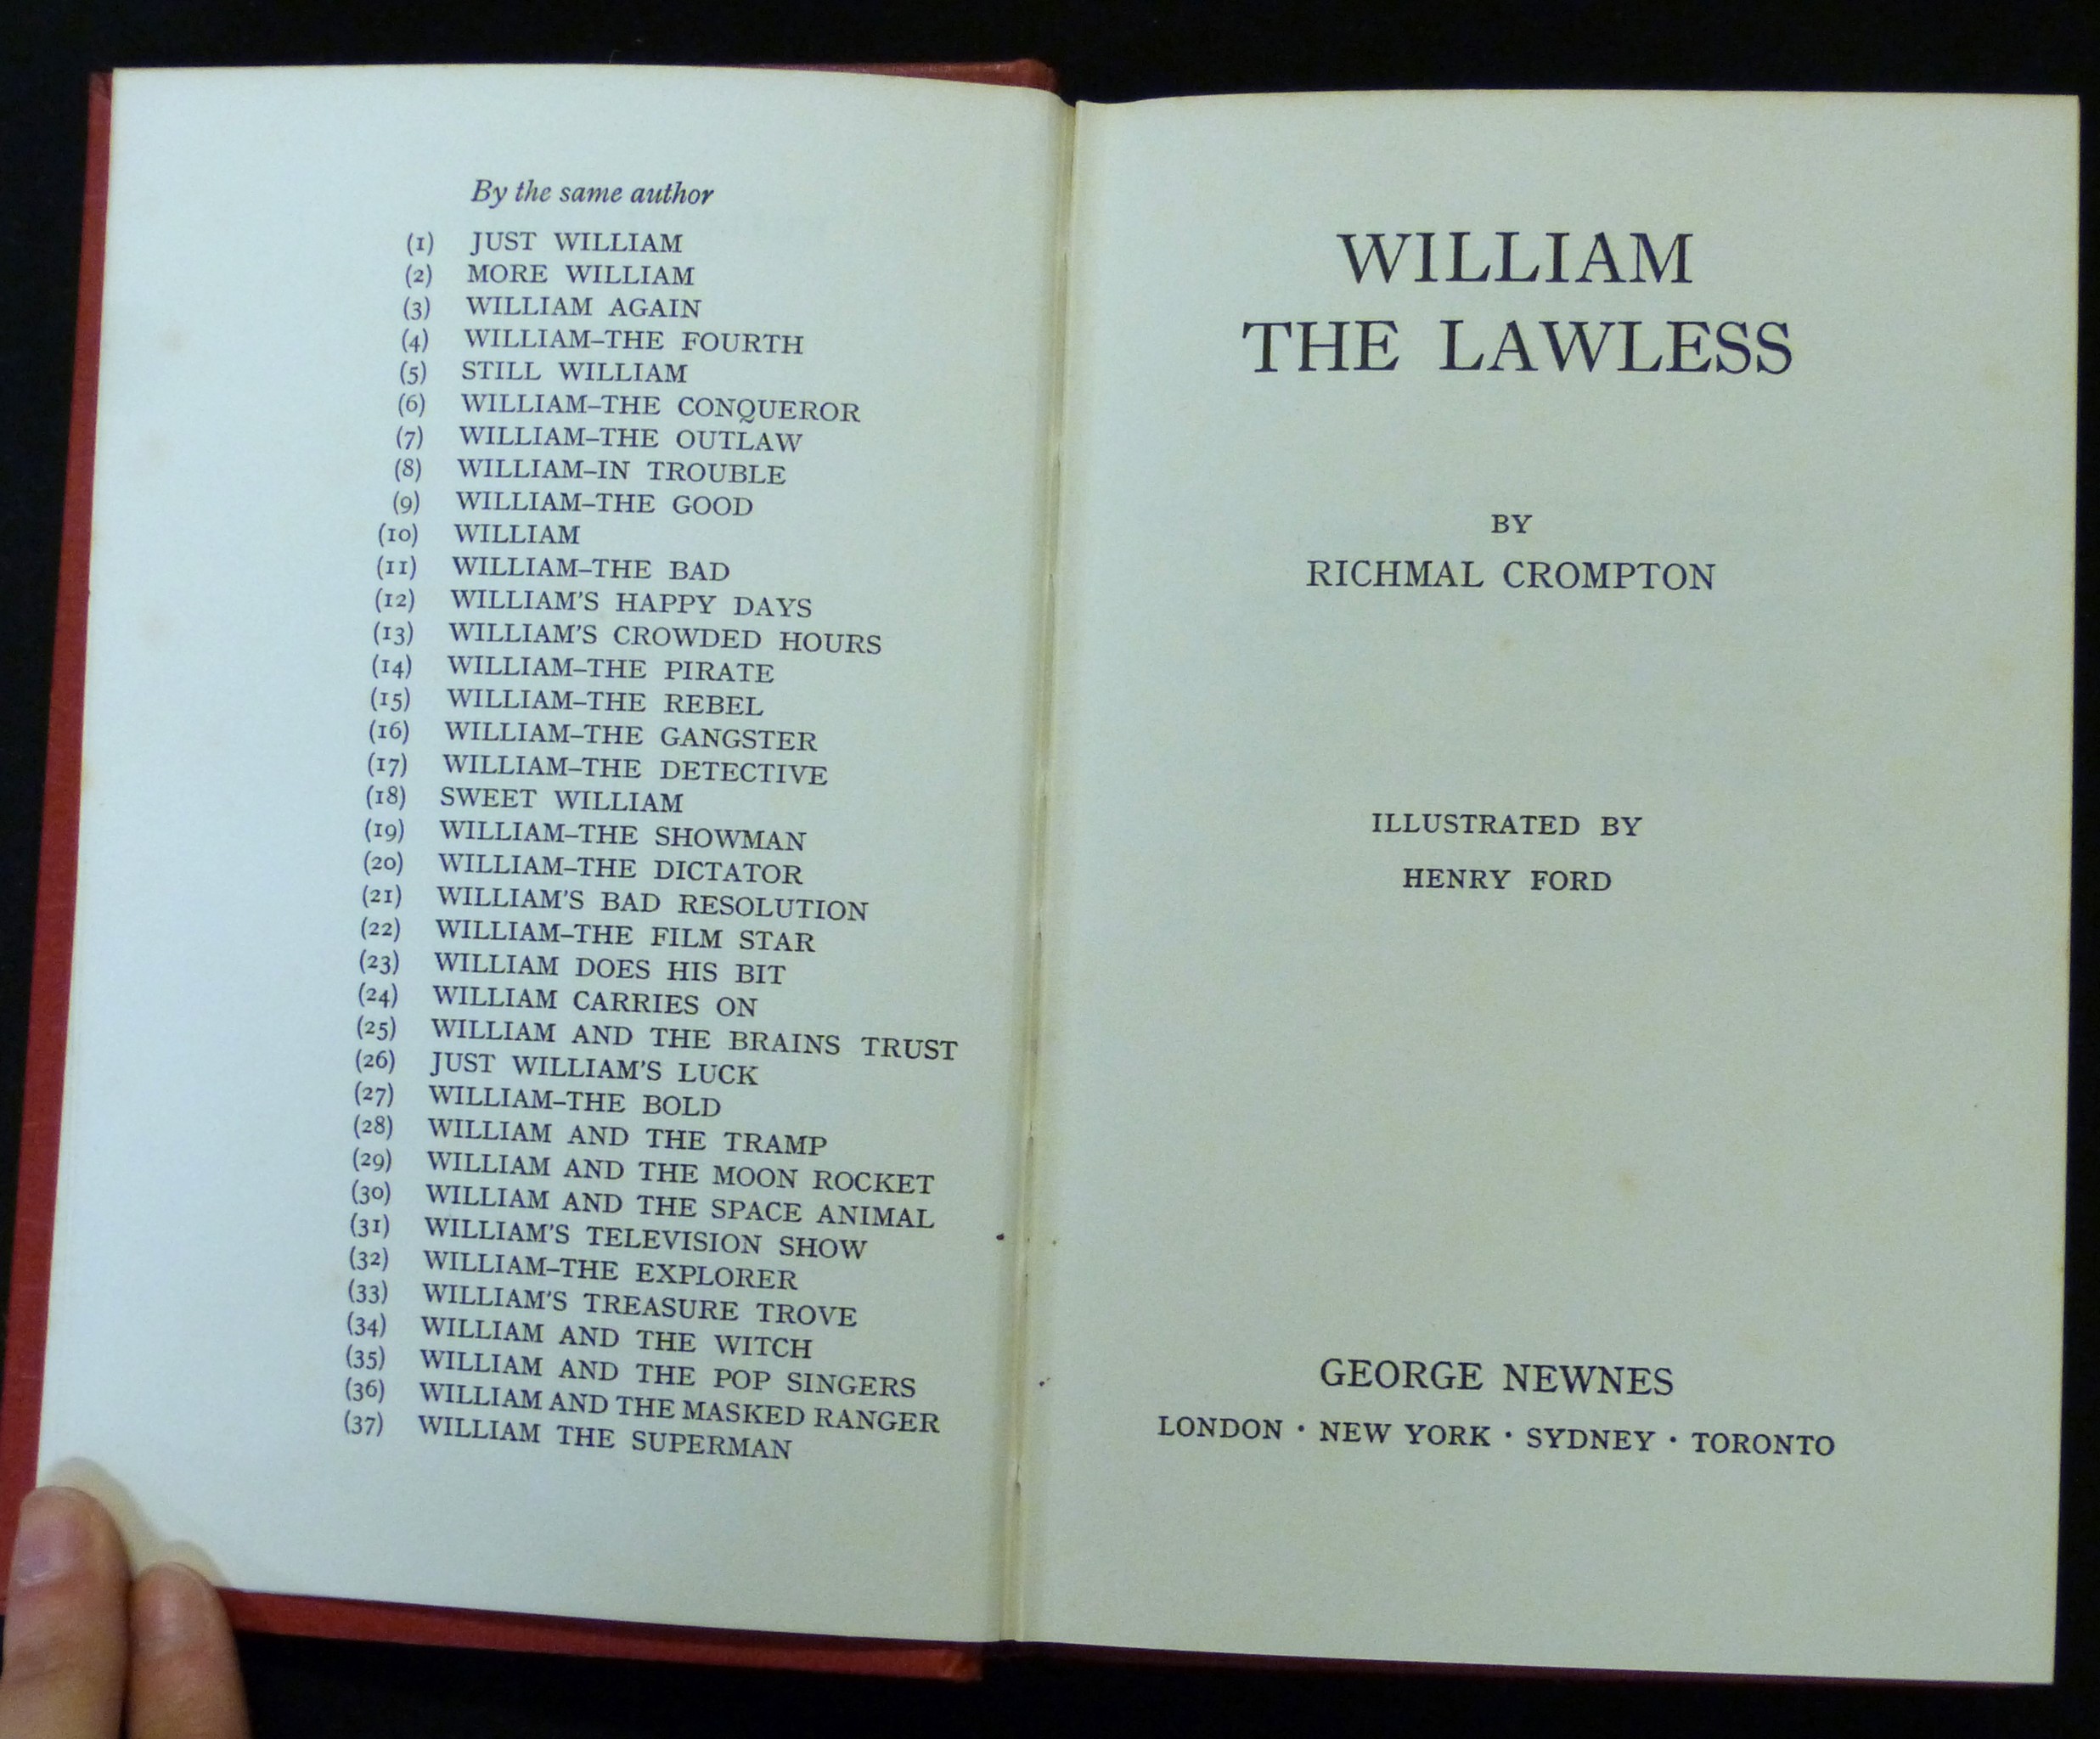 RICHMAL CROMPTON: WILLIAM THE LAWLESS, London, George Newnes, 1970, 1st edition, inscription on